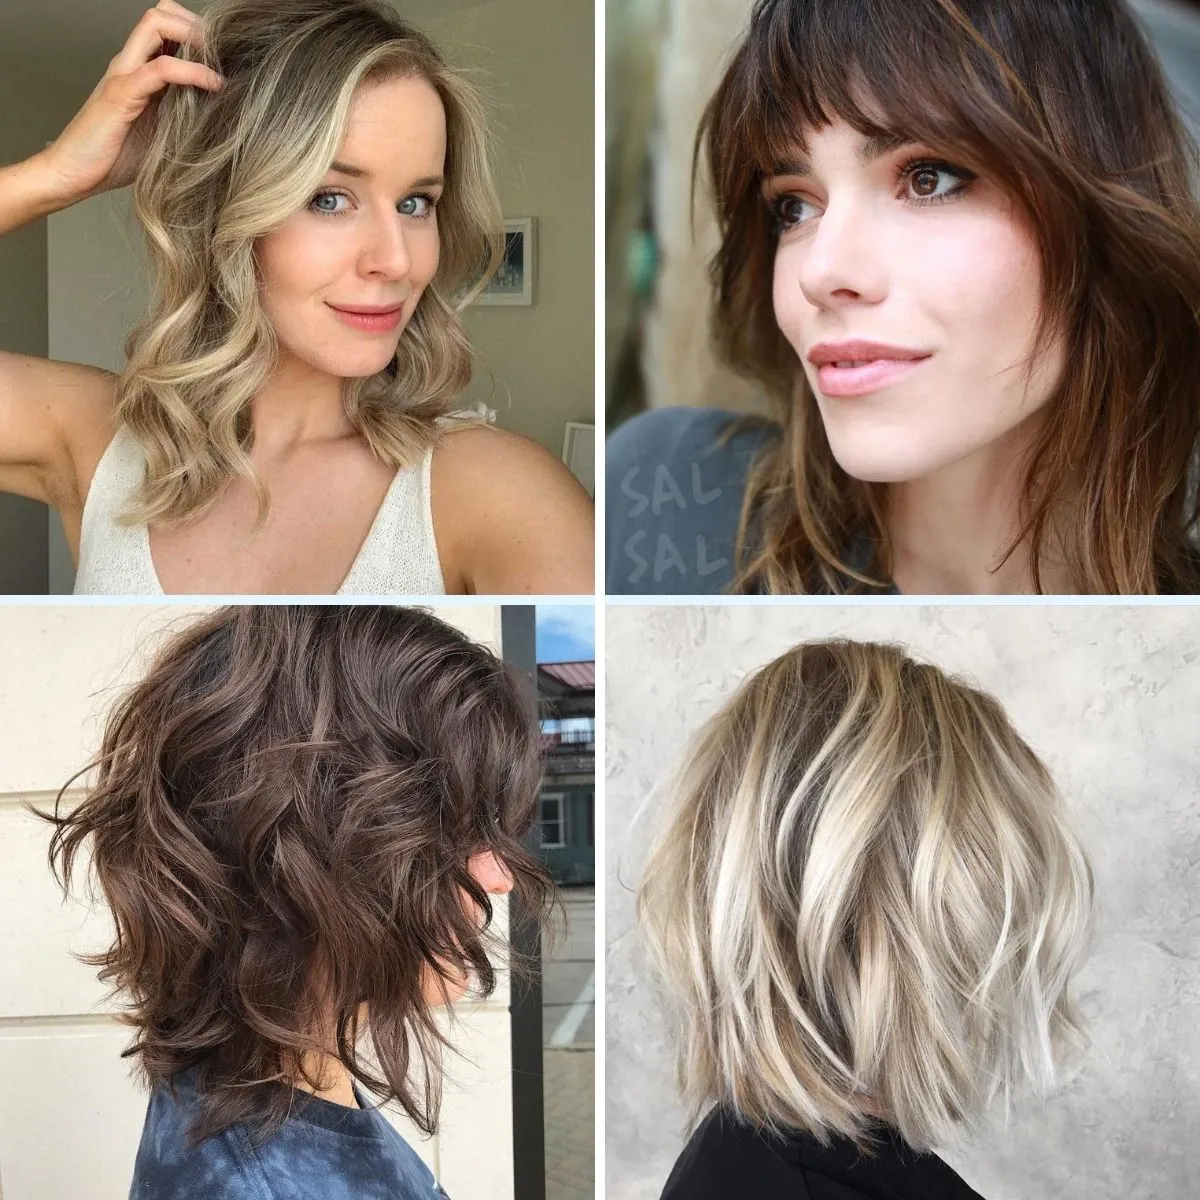 33 Inspiring Short Messy Haircuts to Reshape Your Look in 2022 - BelleTag